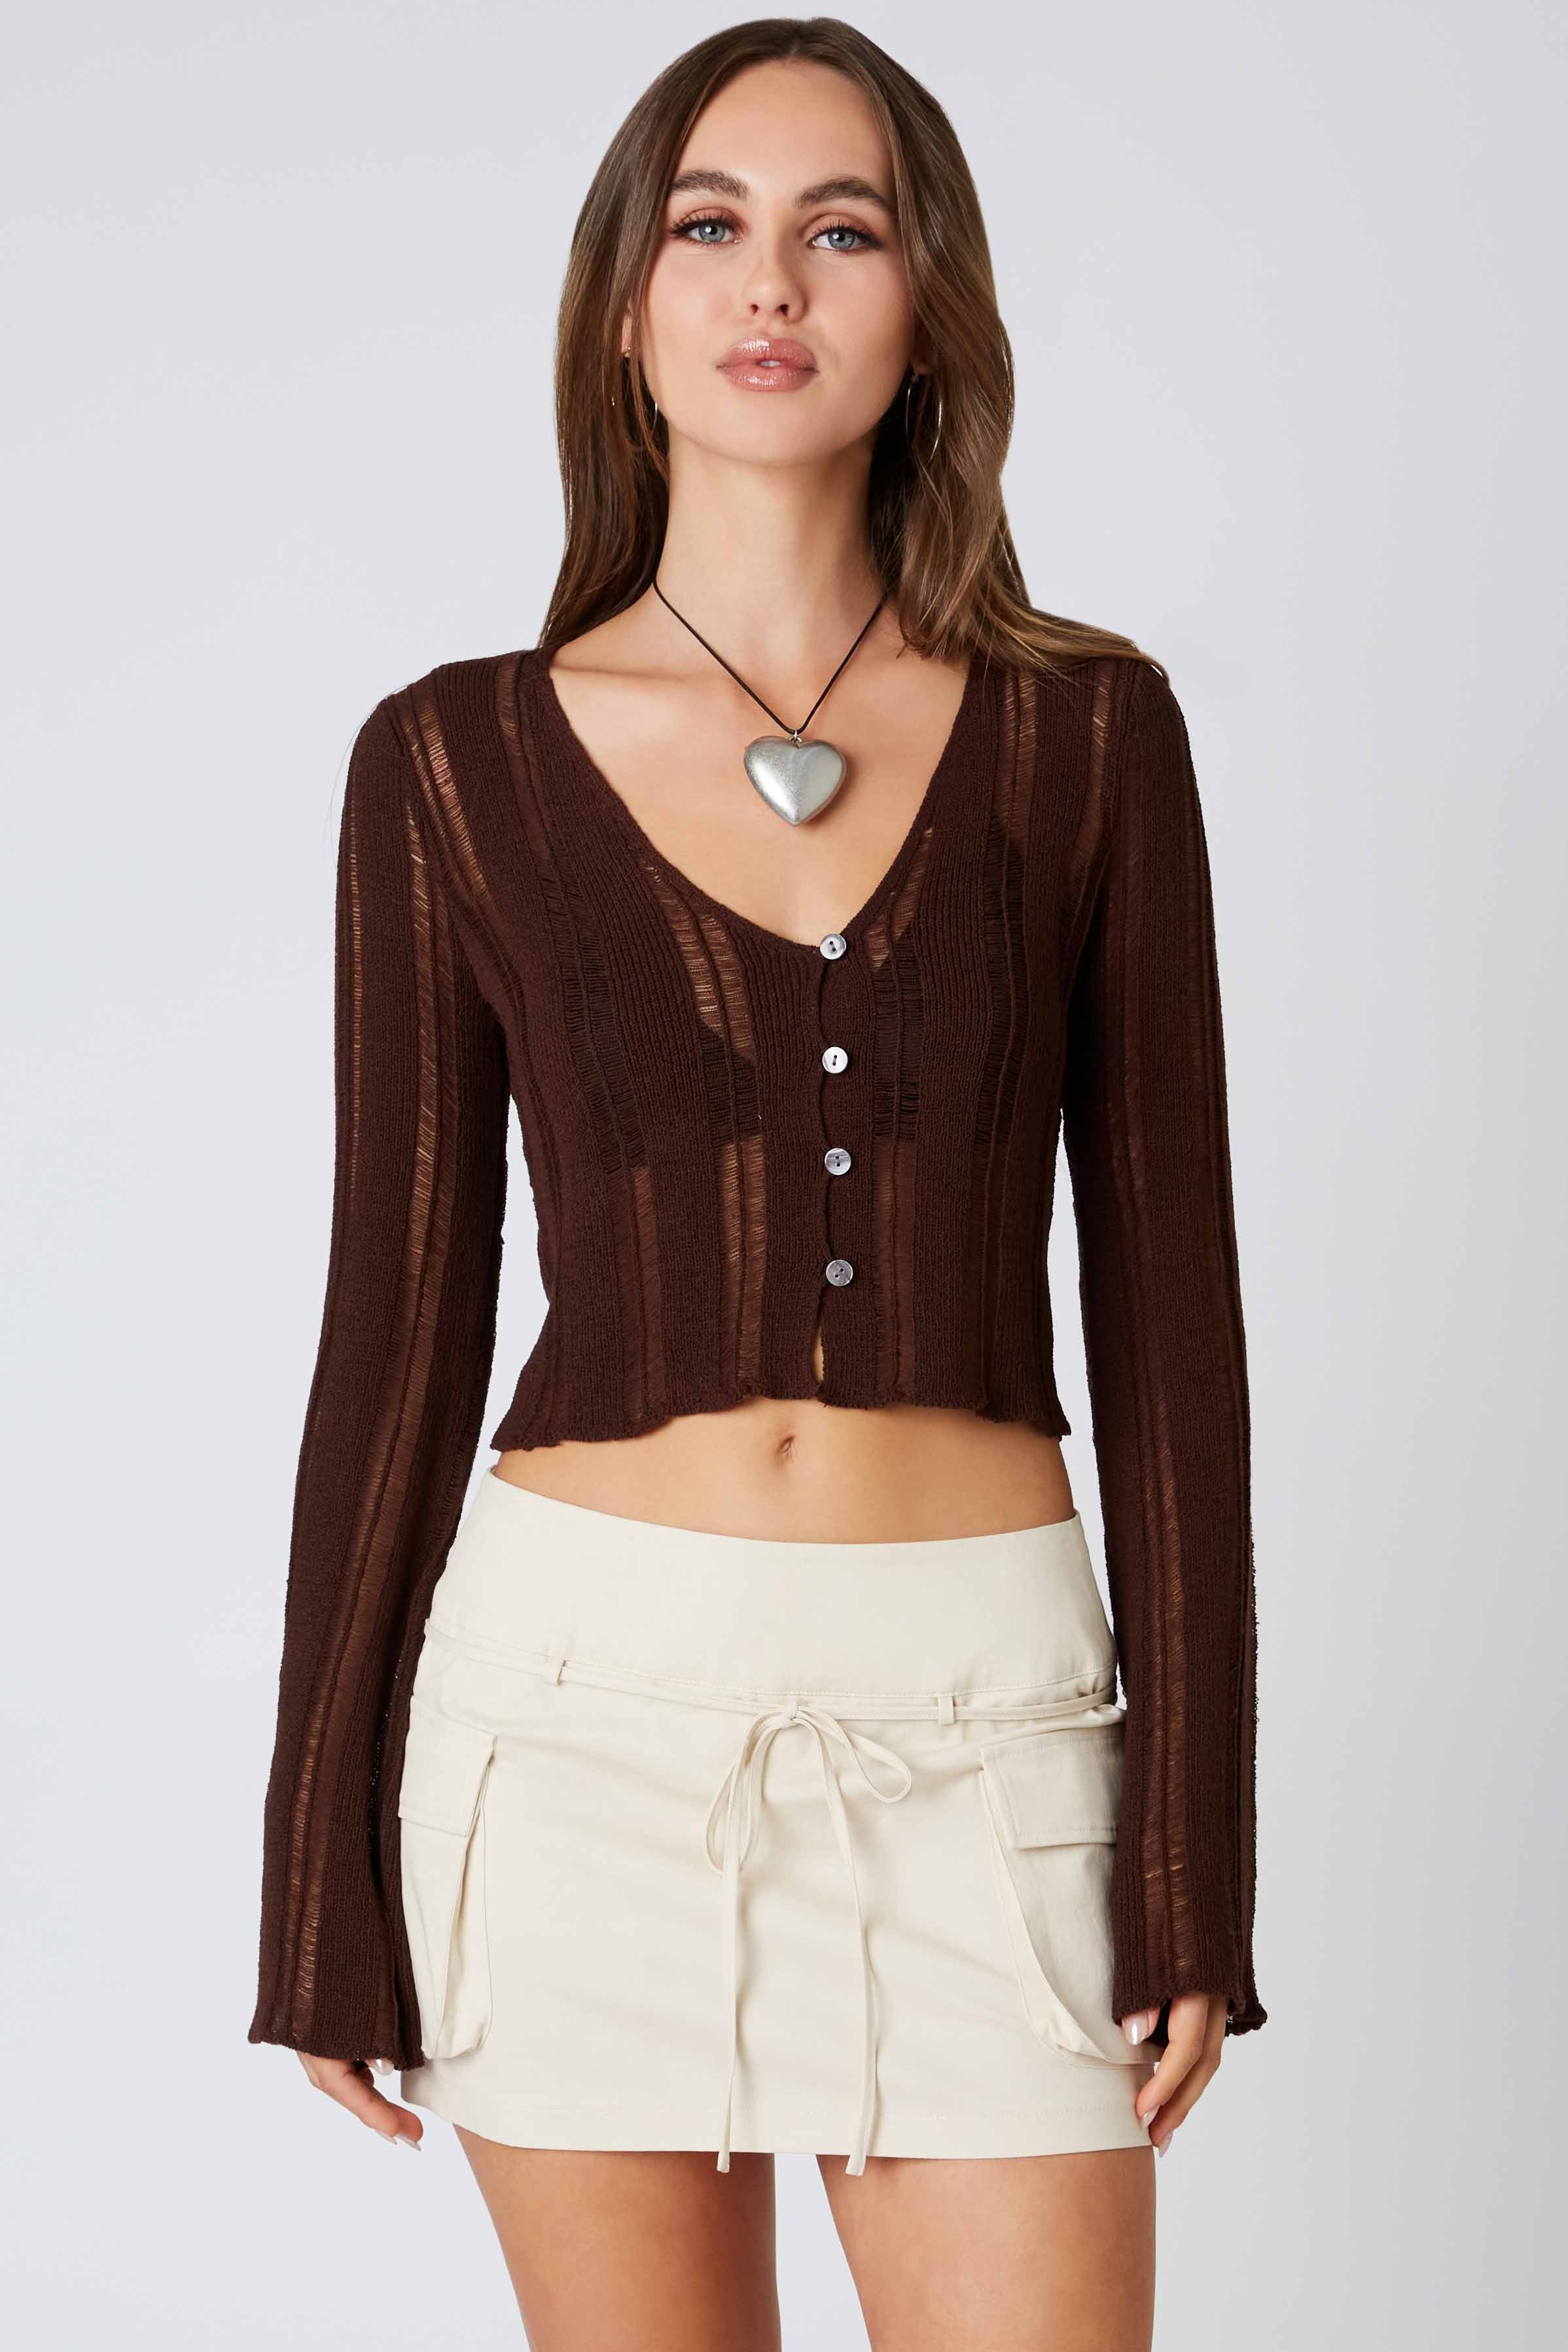 Crochet Knit Bell Sleeve Cardigan in Chocolate Front View